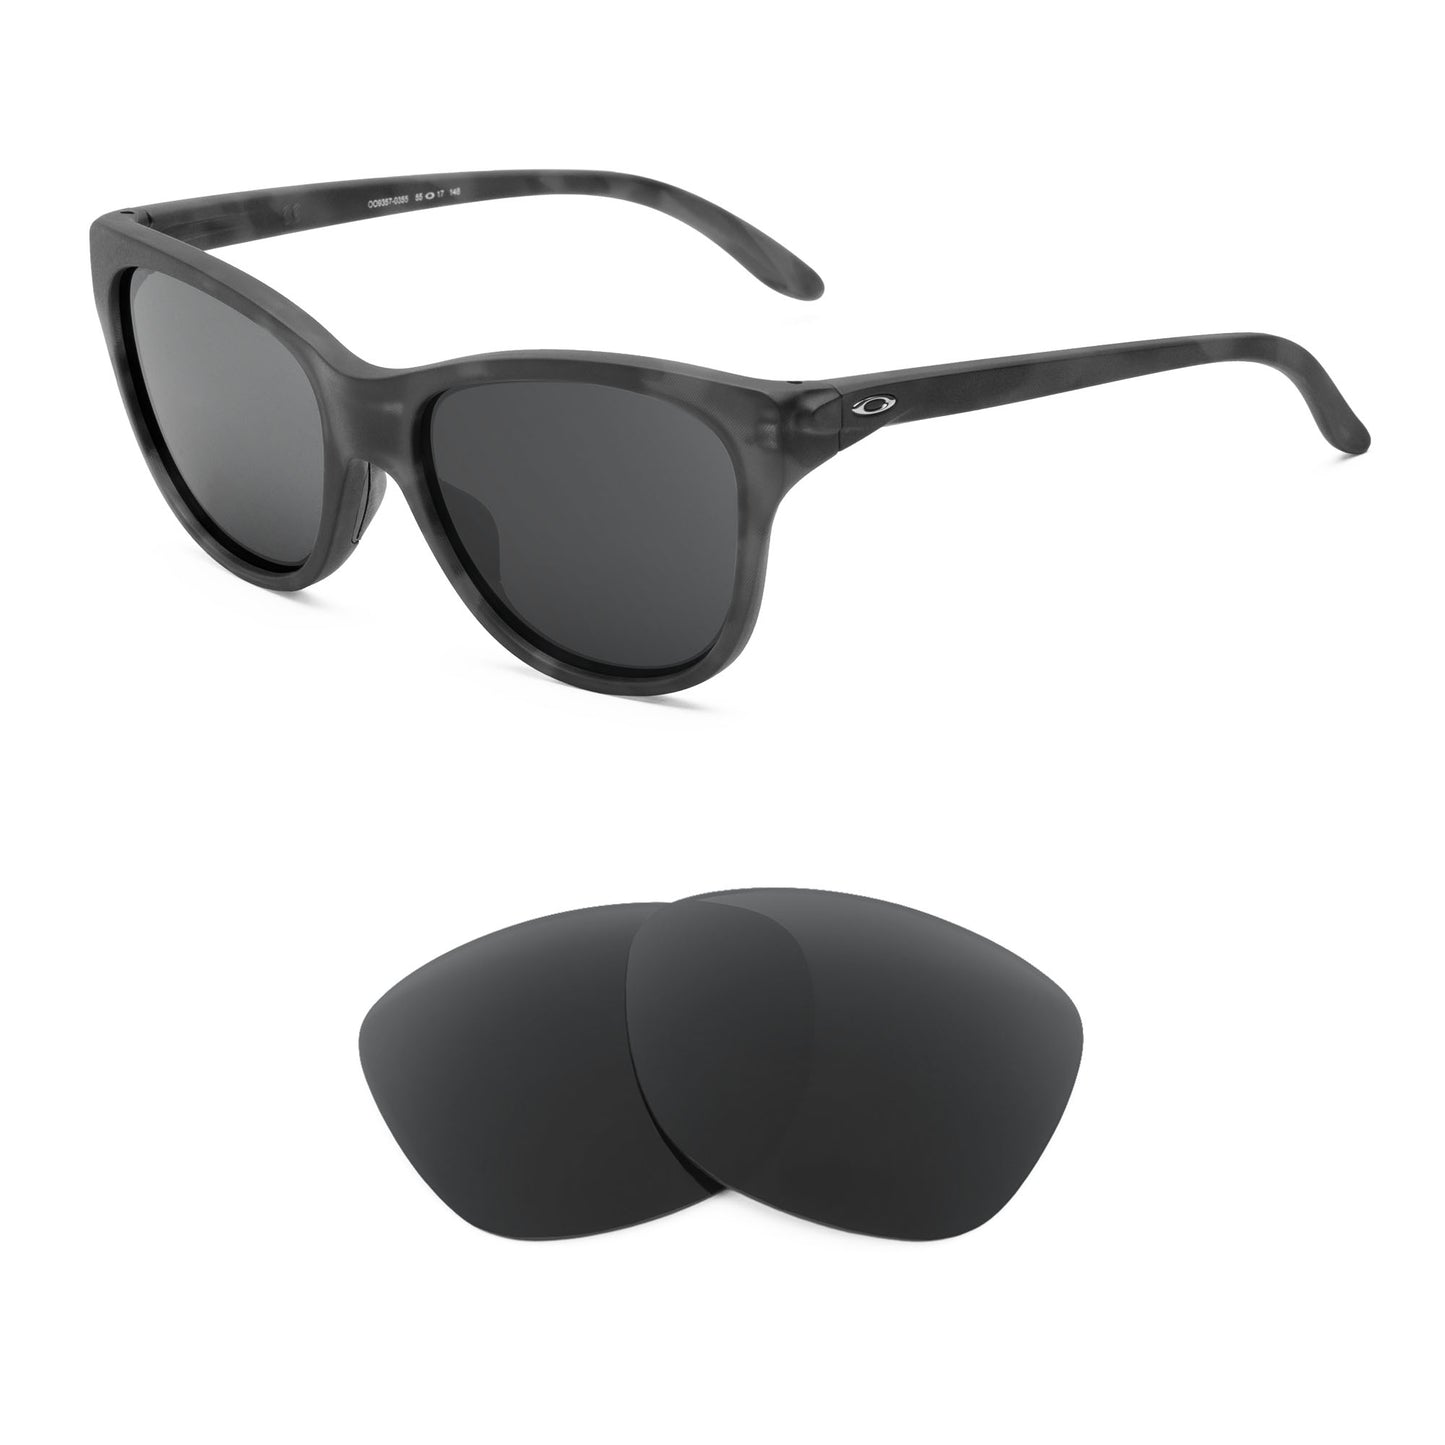 Oakley Hold Out sunglasses with replacement lenses